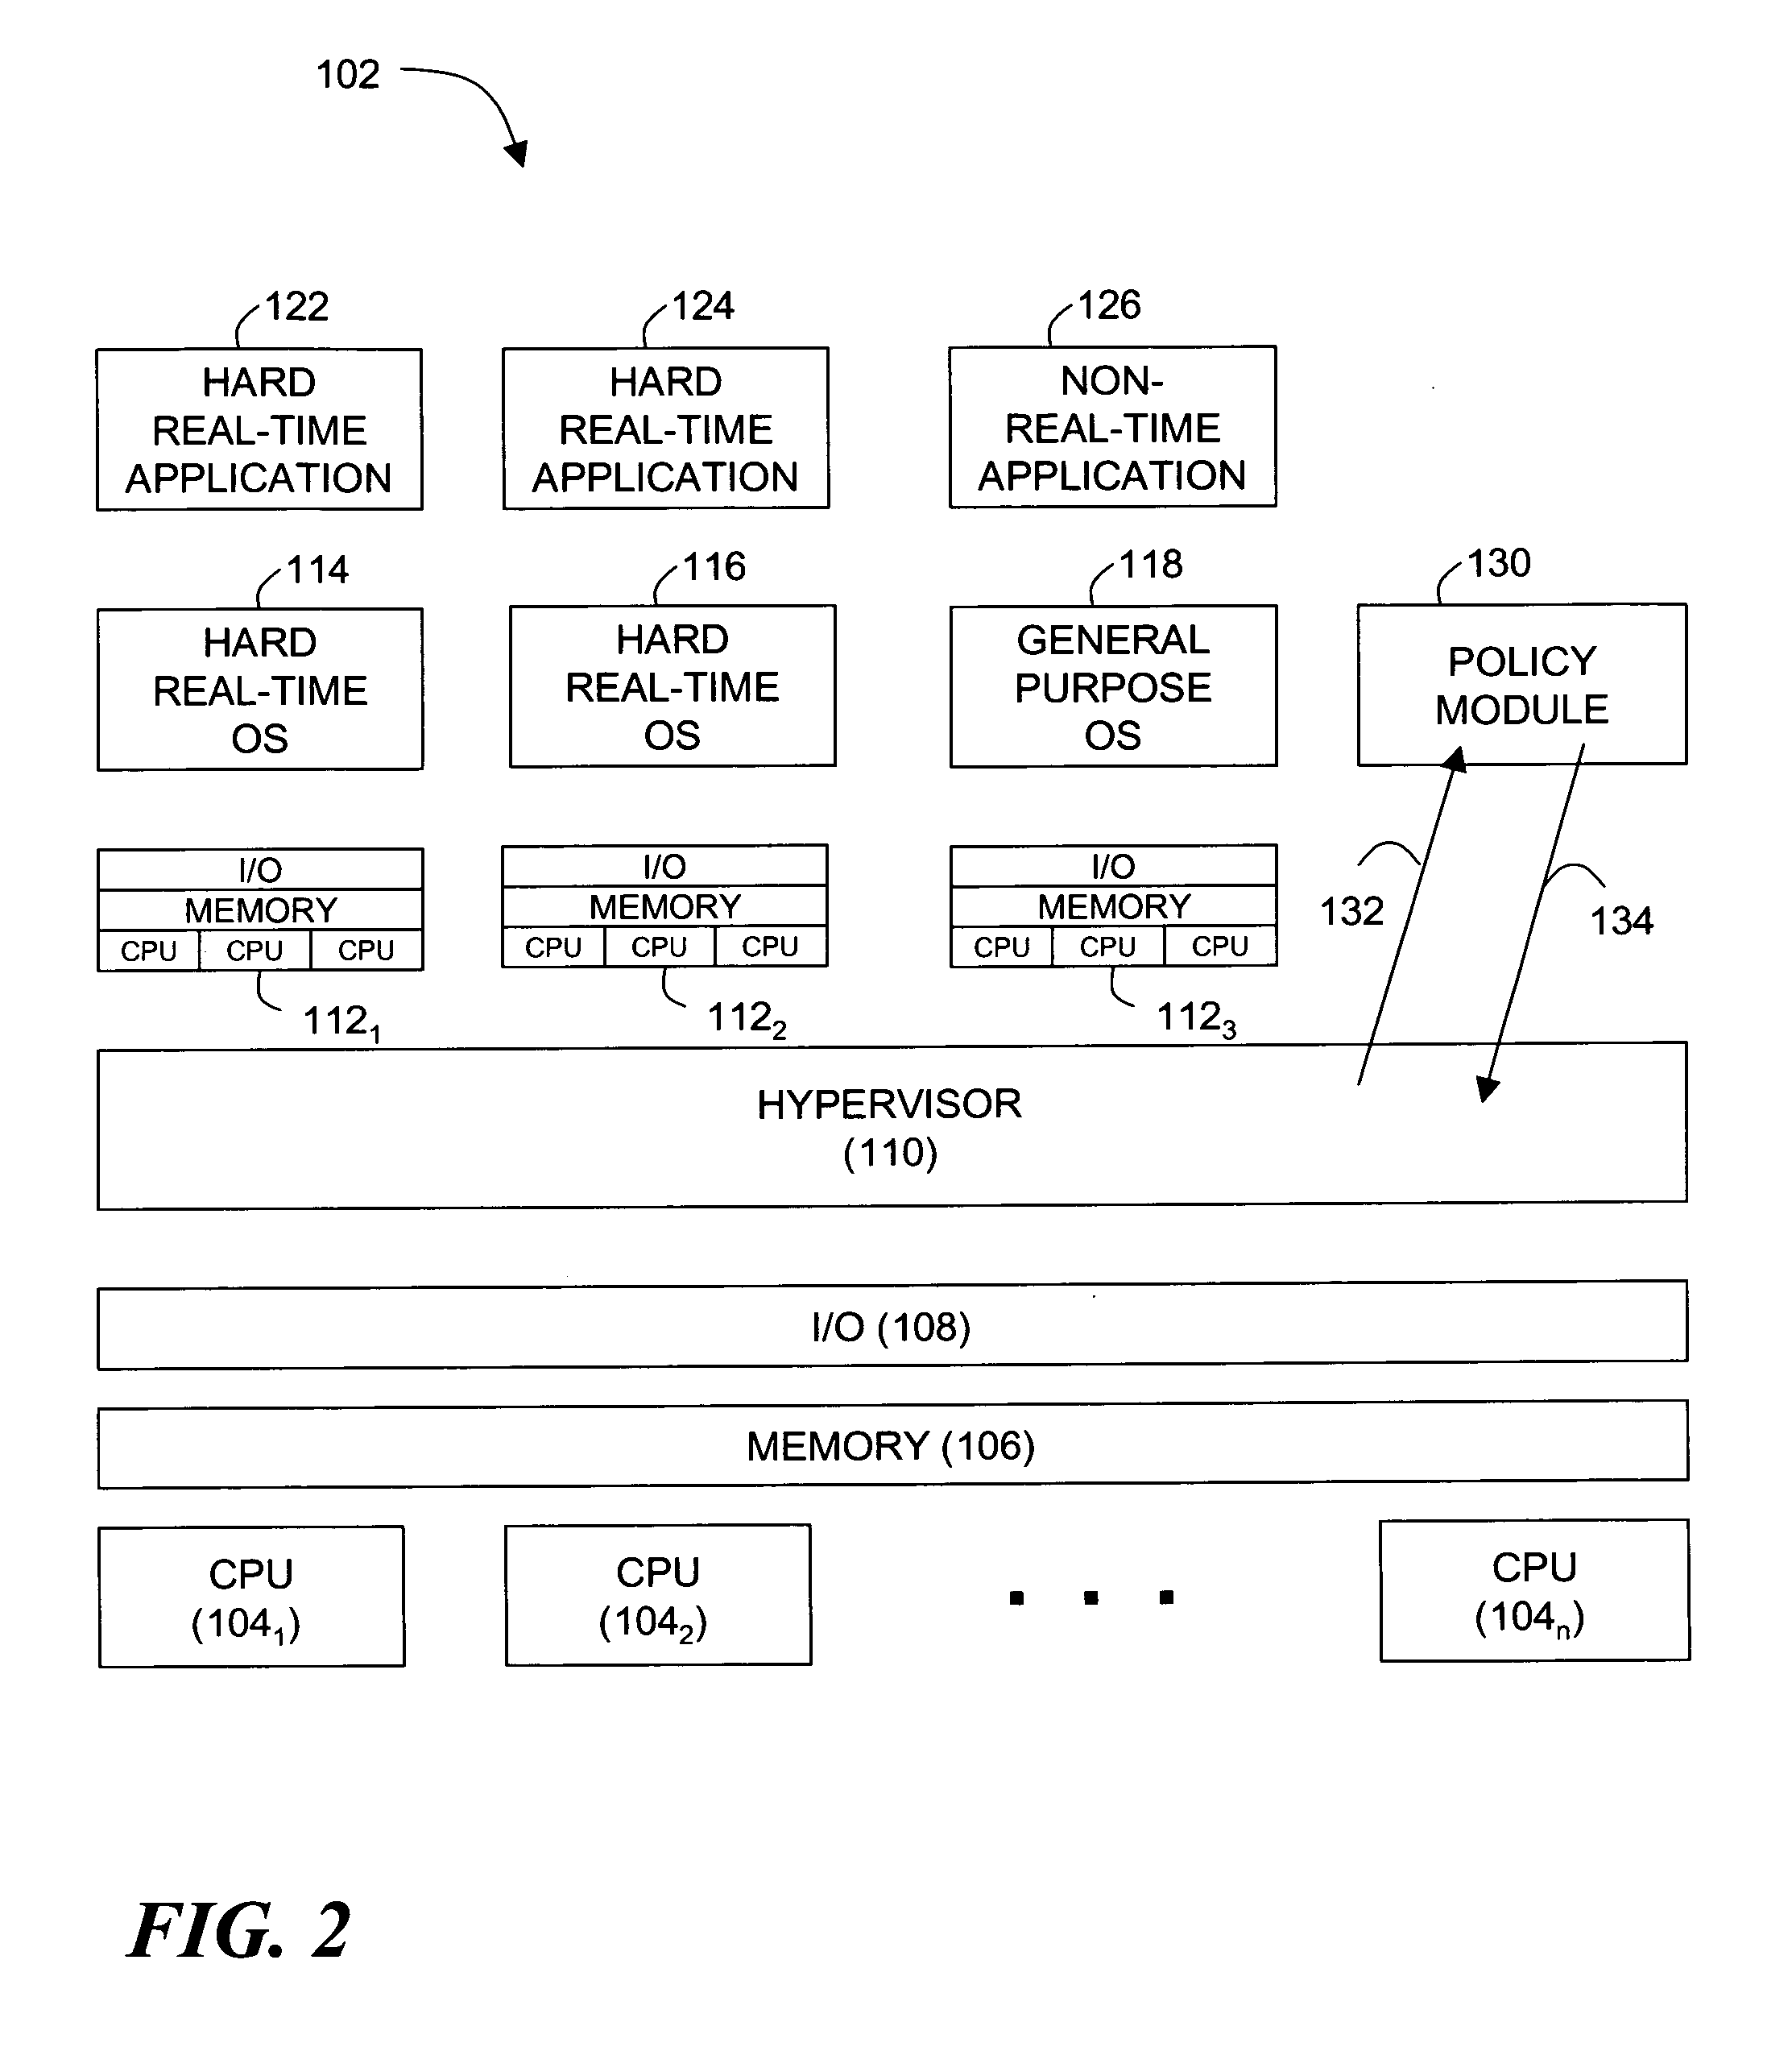 Enhancement of real-time operating system functionality using a hypervisor